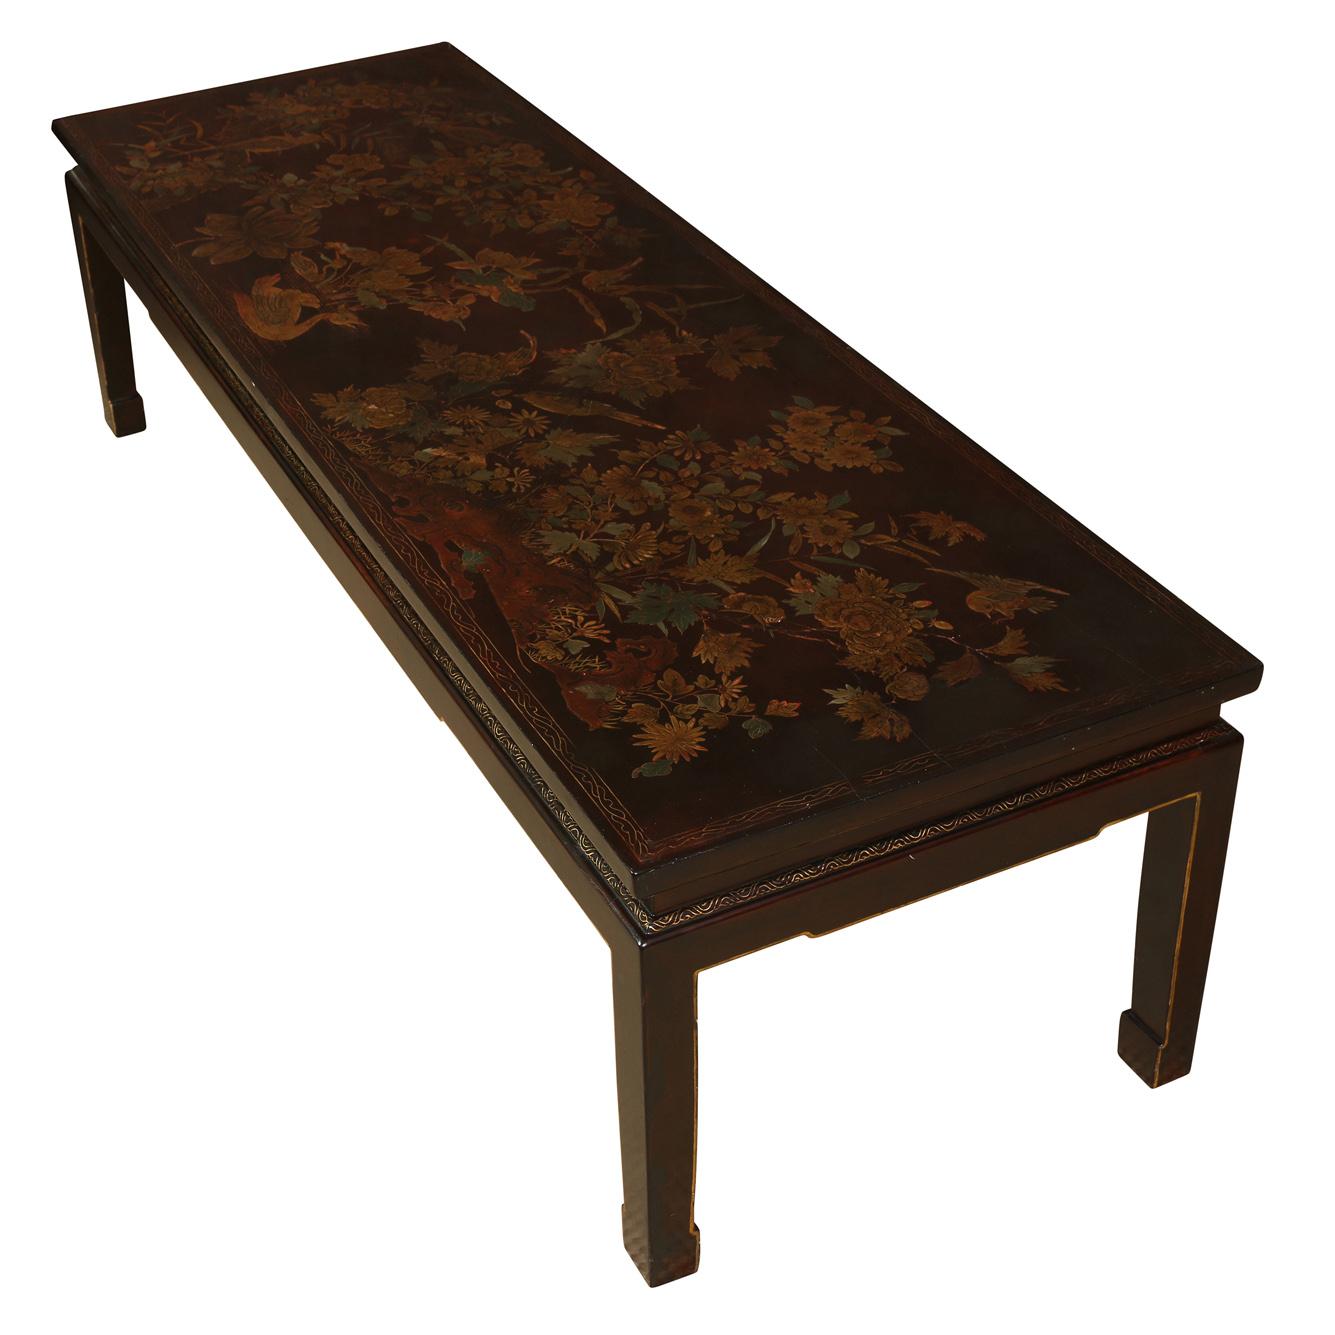 Chinoiserie Gilt Decorated Chocolate Brown Coffee Table With Glass Top In Good Condition For Sale In Locust Valley, NY